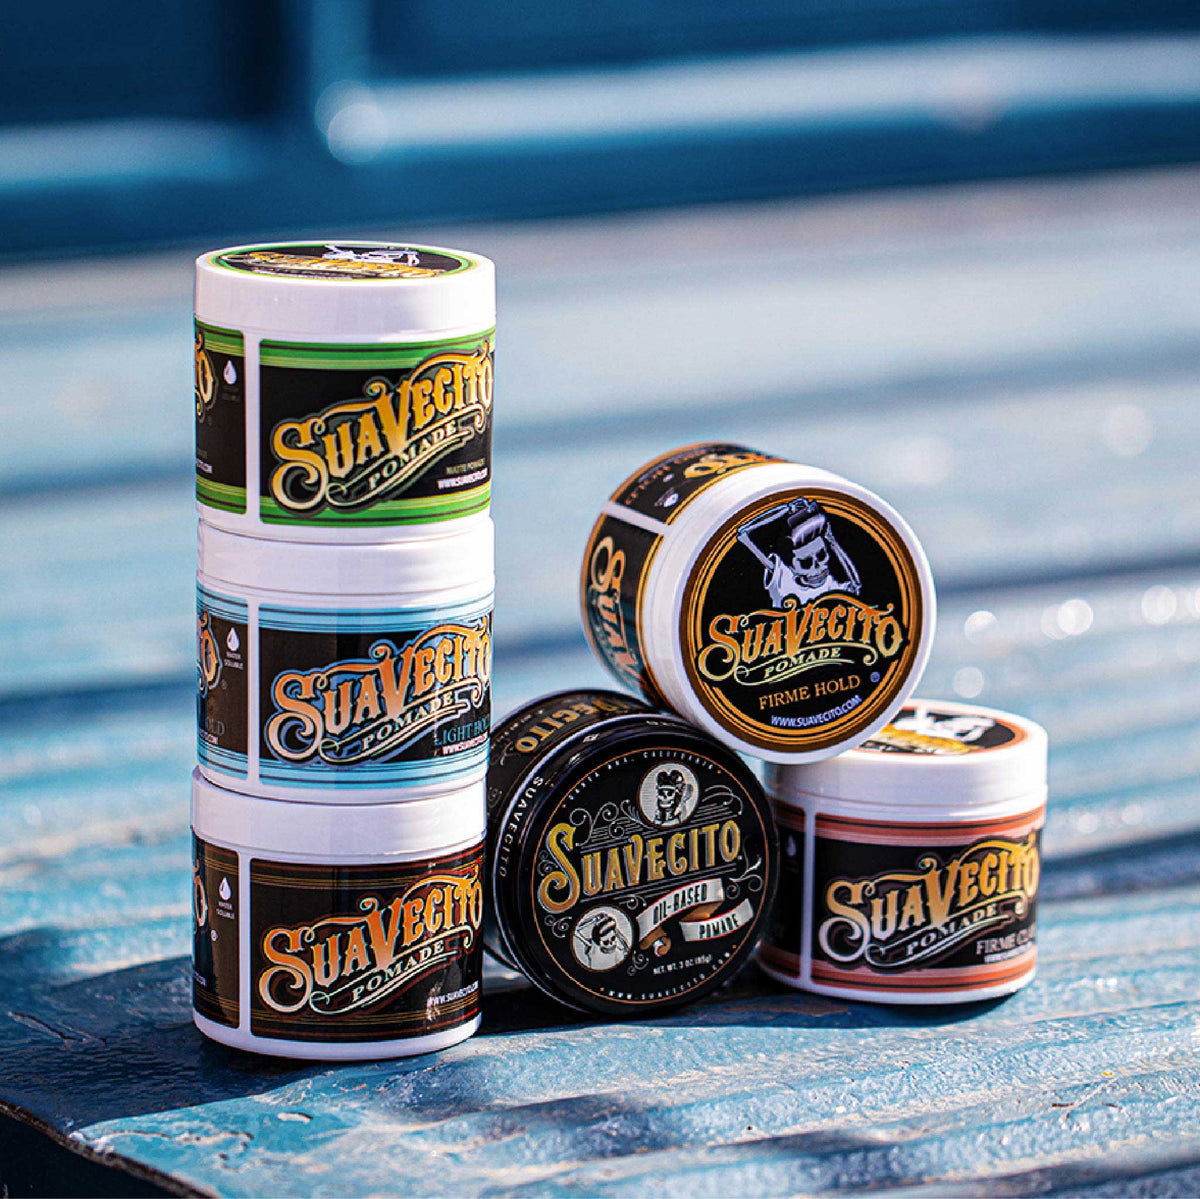 Suavecito Hair Products